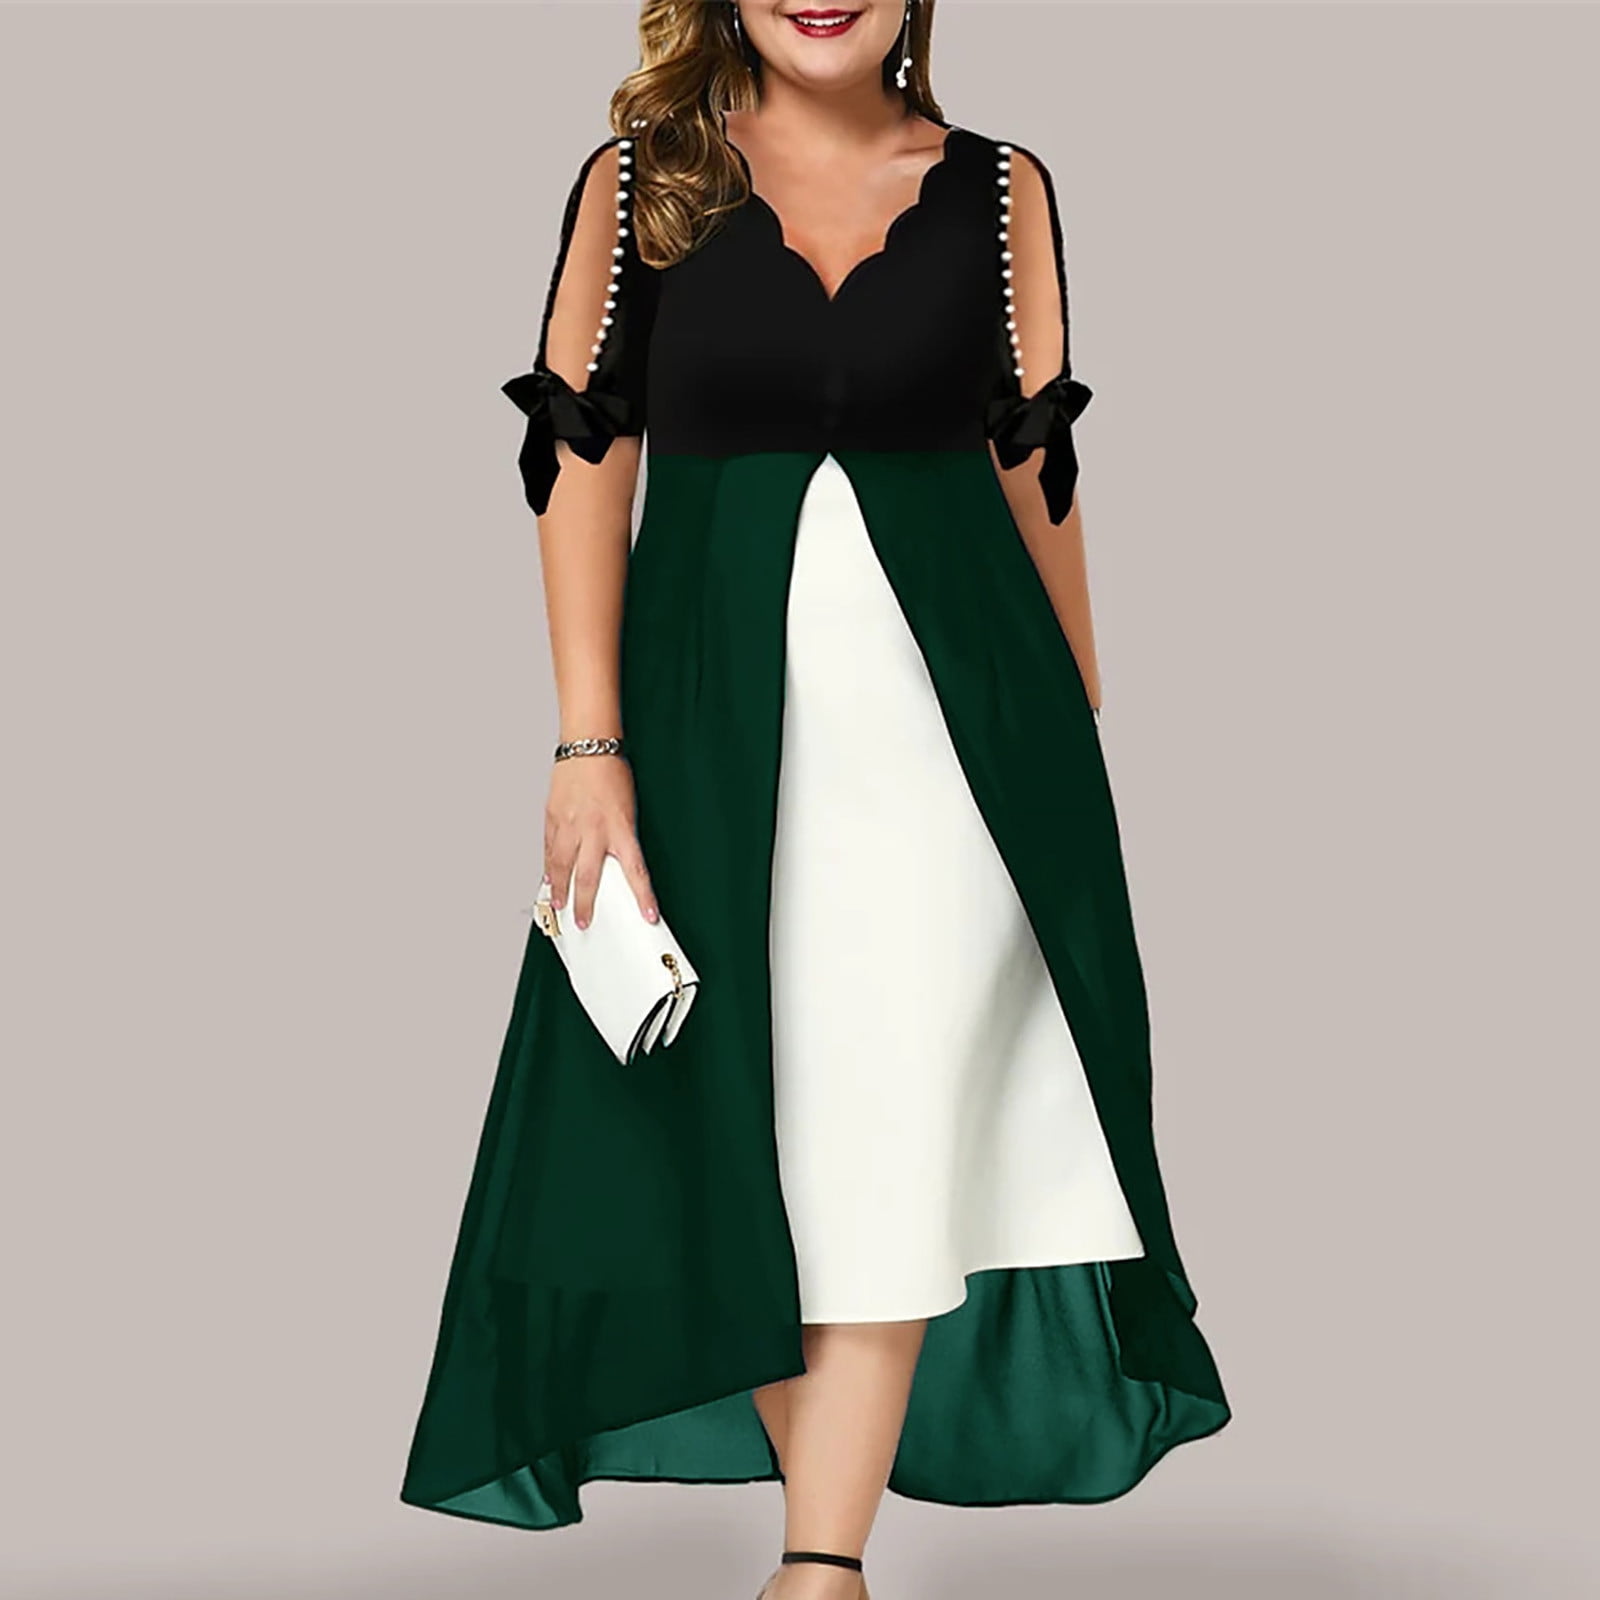 Wycnly Womens Dresses Short Sleeve V-Neck Color Patchwork Casual Long  Summer Dress Cold Shoulder Party Prom A Line Plus Size Dresses Wine XXXXL 